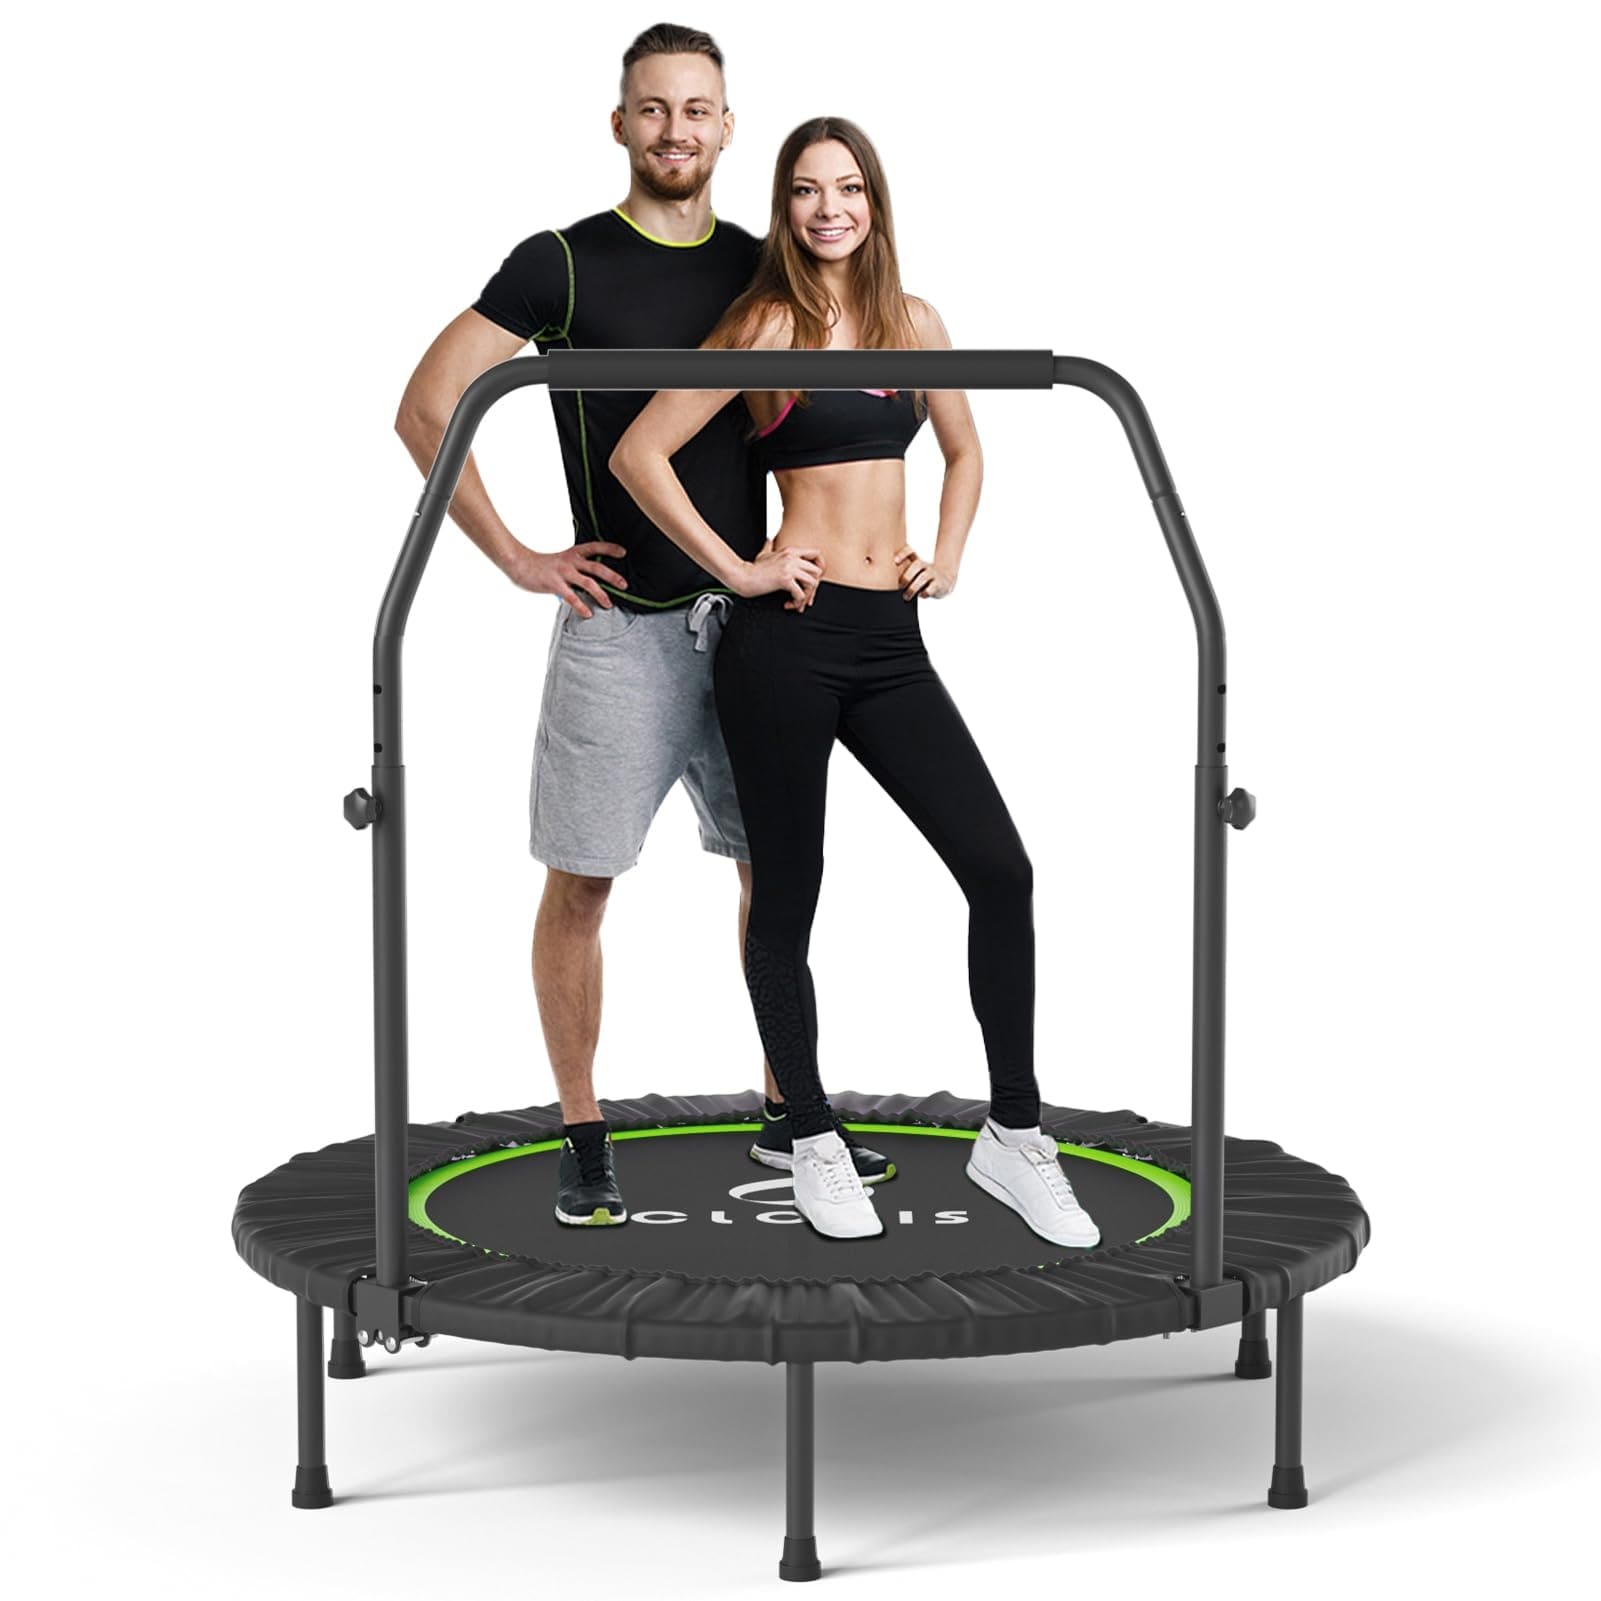 Exercise Trampolines - Bed Bath & Beyond